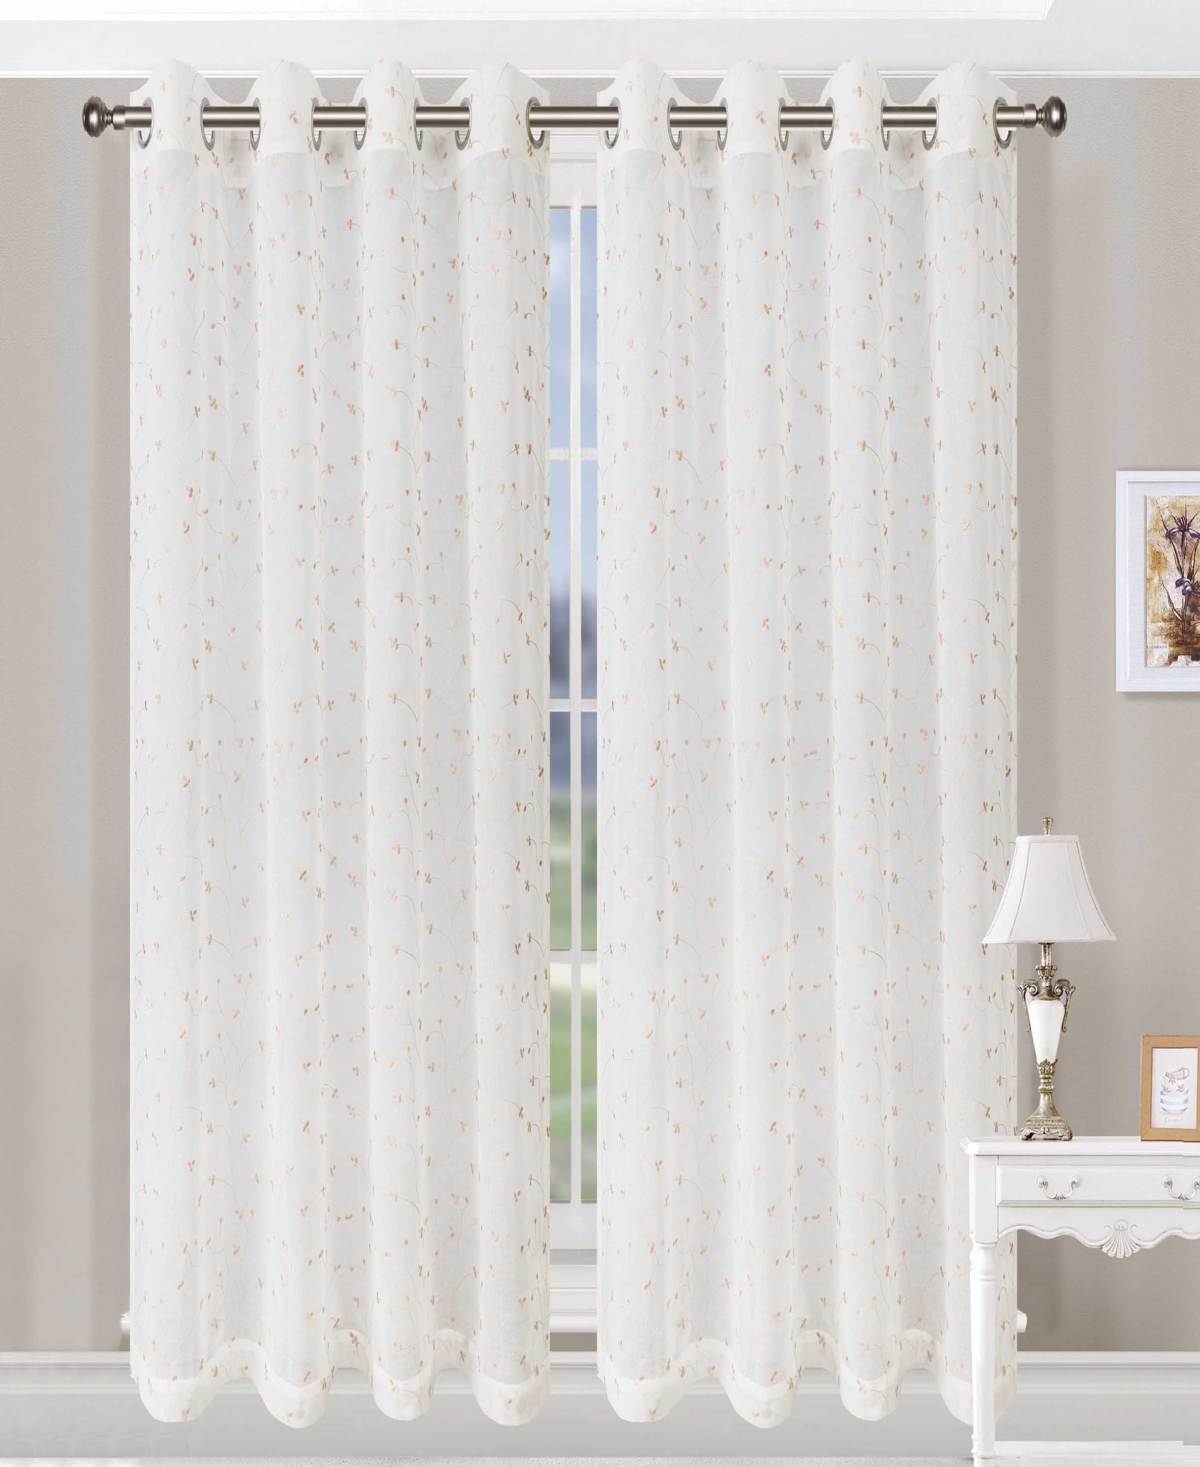 Traditional Embroidered Delicate Flower Farmhouse Sheer Grommet 2-Piece Curtain Panel Set with Grommet Header Top, 52" X 108" - Champagne